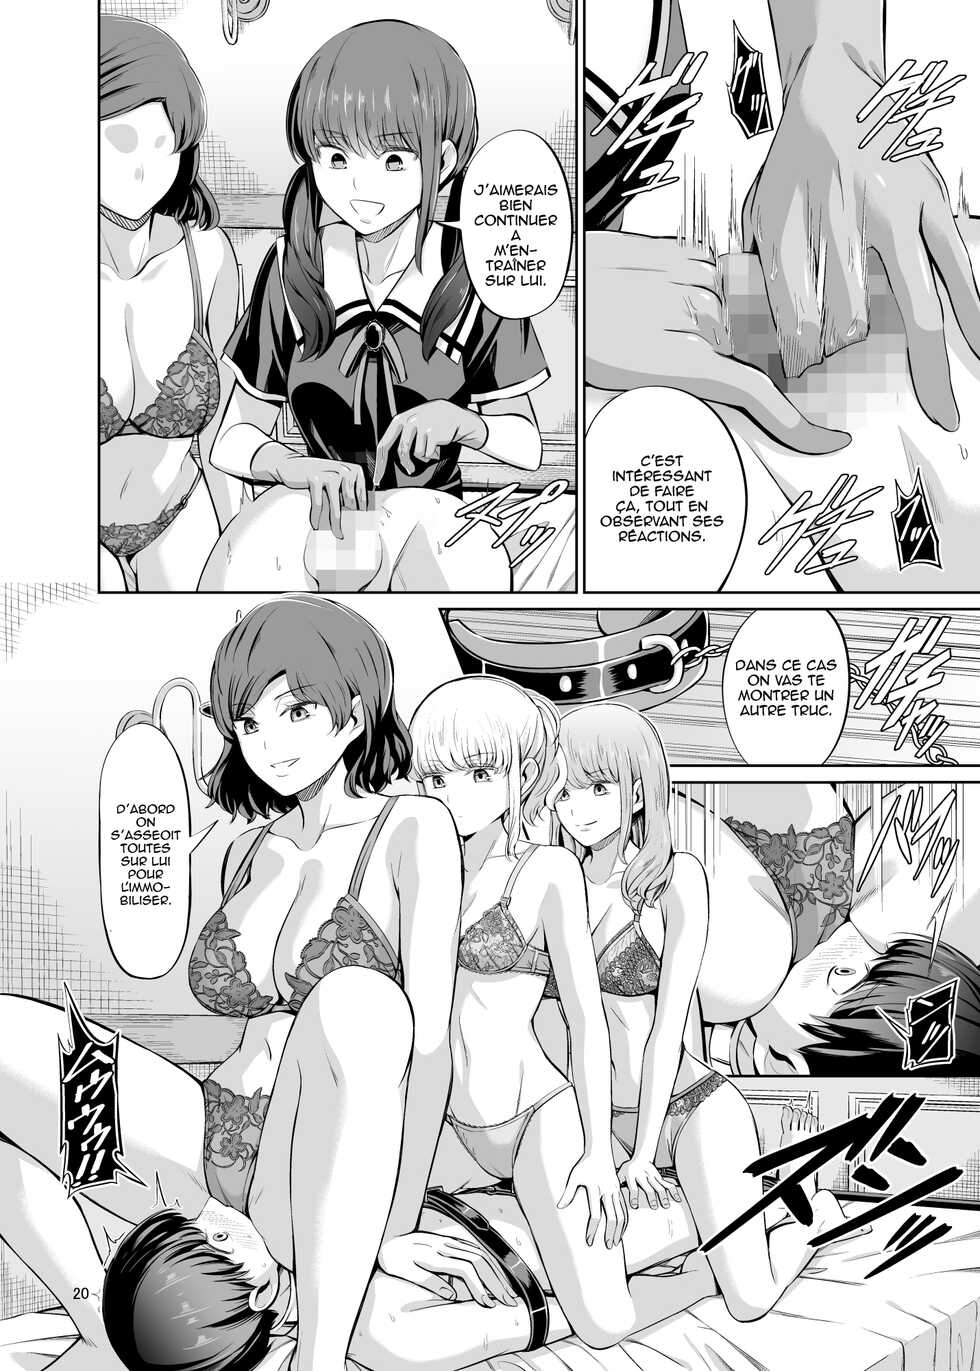 [Yamahata Rian] A Country Based on Point System Chapitre 2 (Girls forM Vol. 20) [French] [Le[T] - Page 22